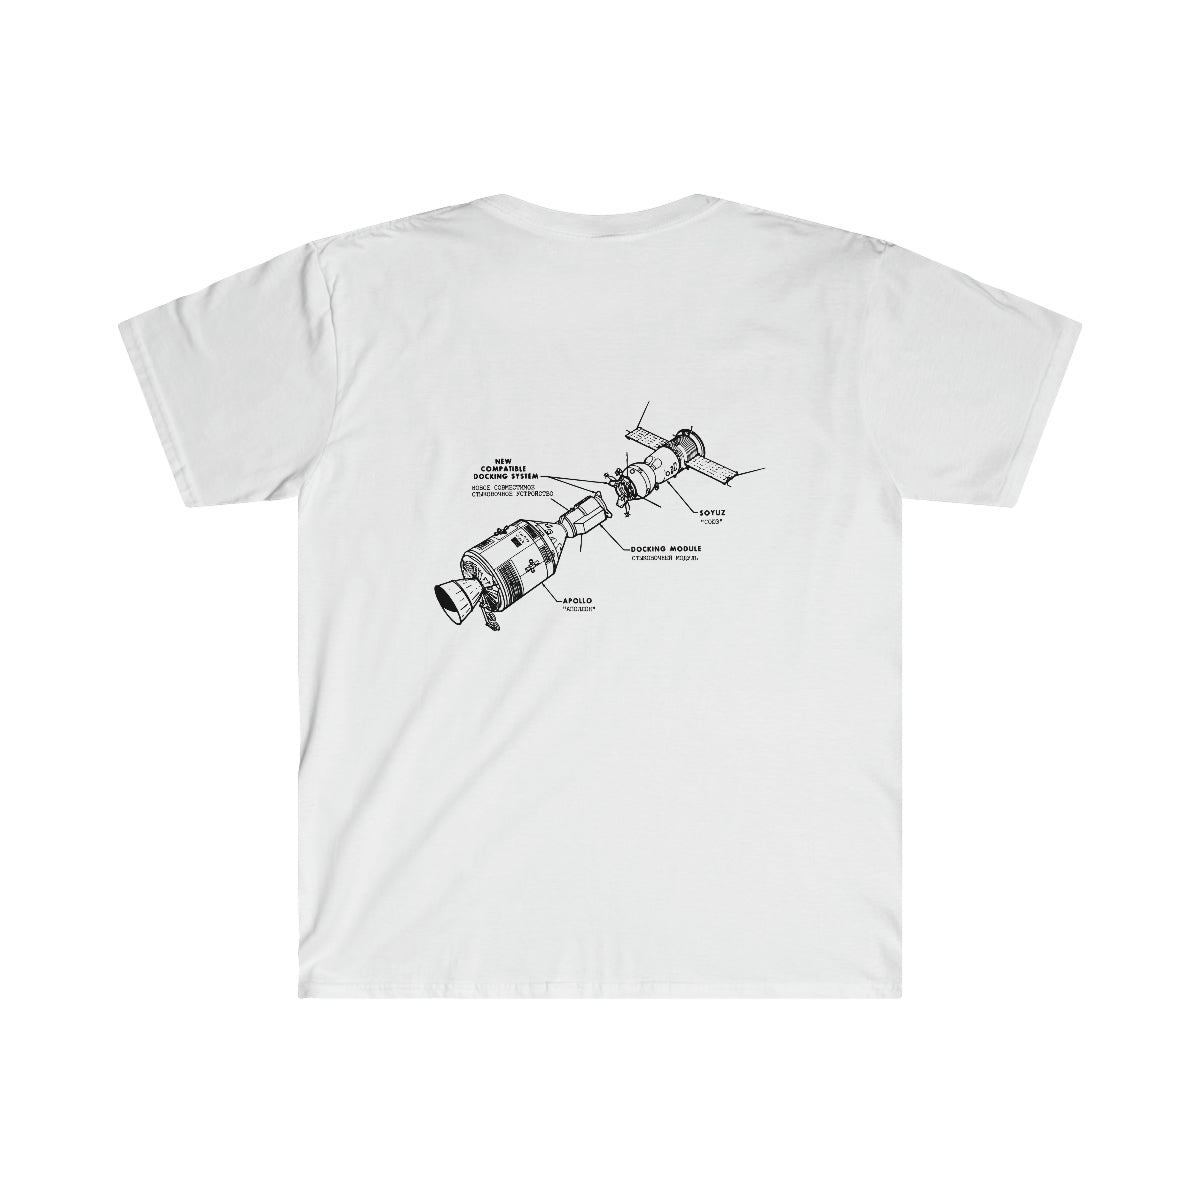 A white Apollo Docking T-Shirt perfect for a space enthusiast with a rocket drawing.